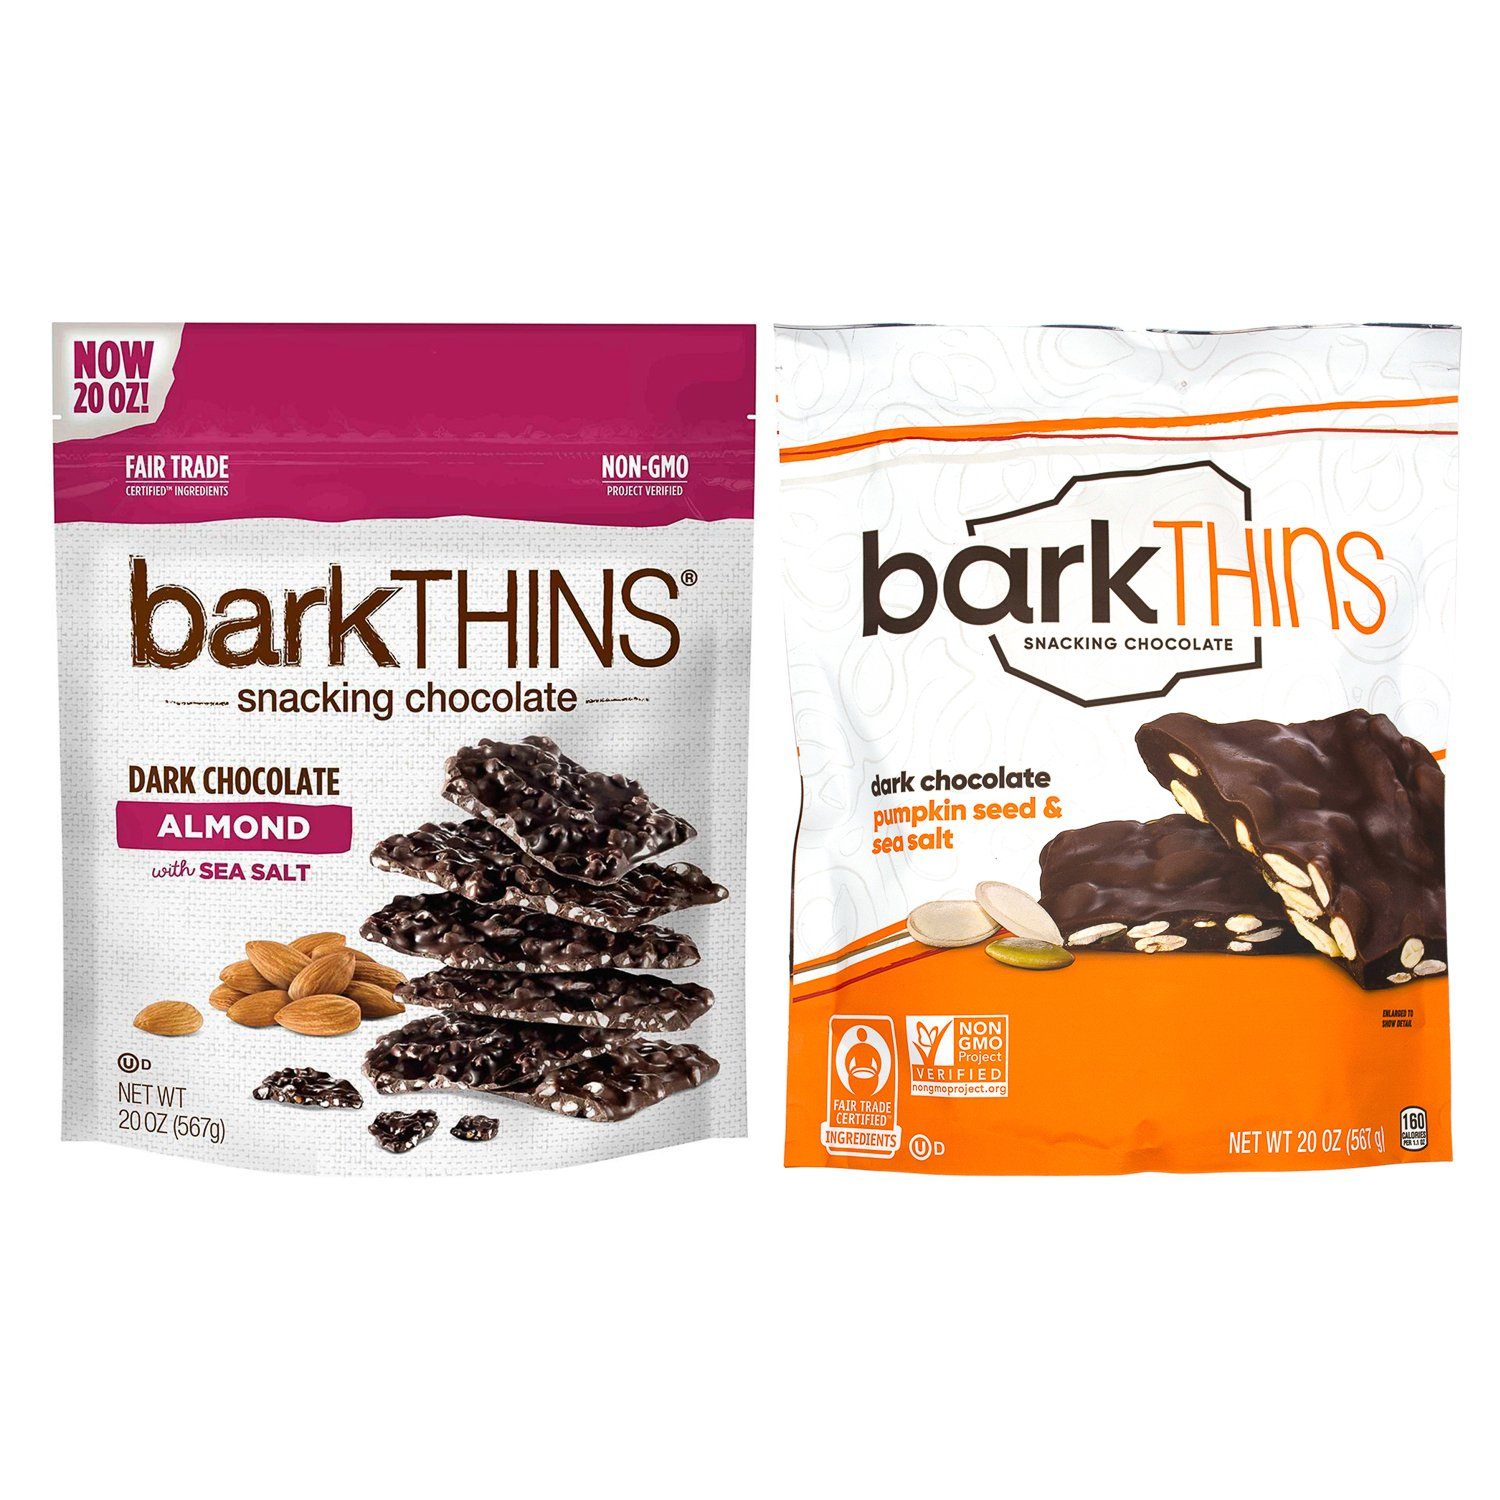 A Definitive Ranking of All 9 barkTHINS Flavors